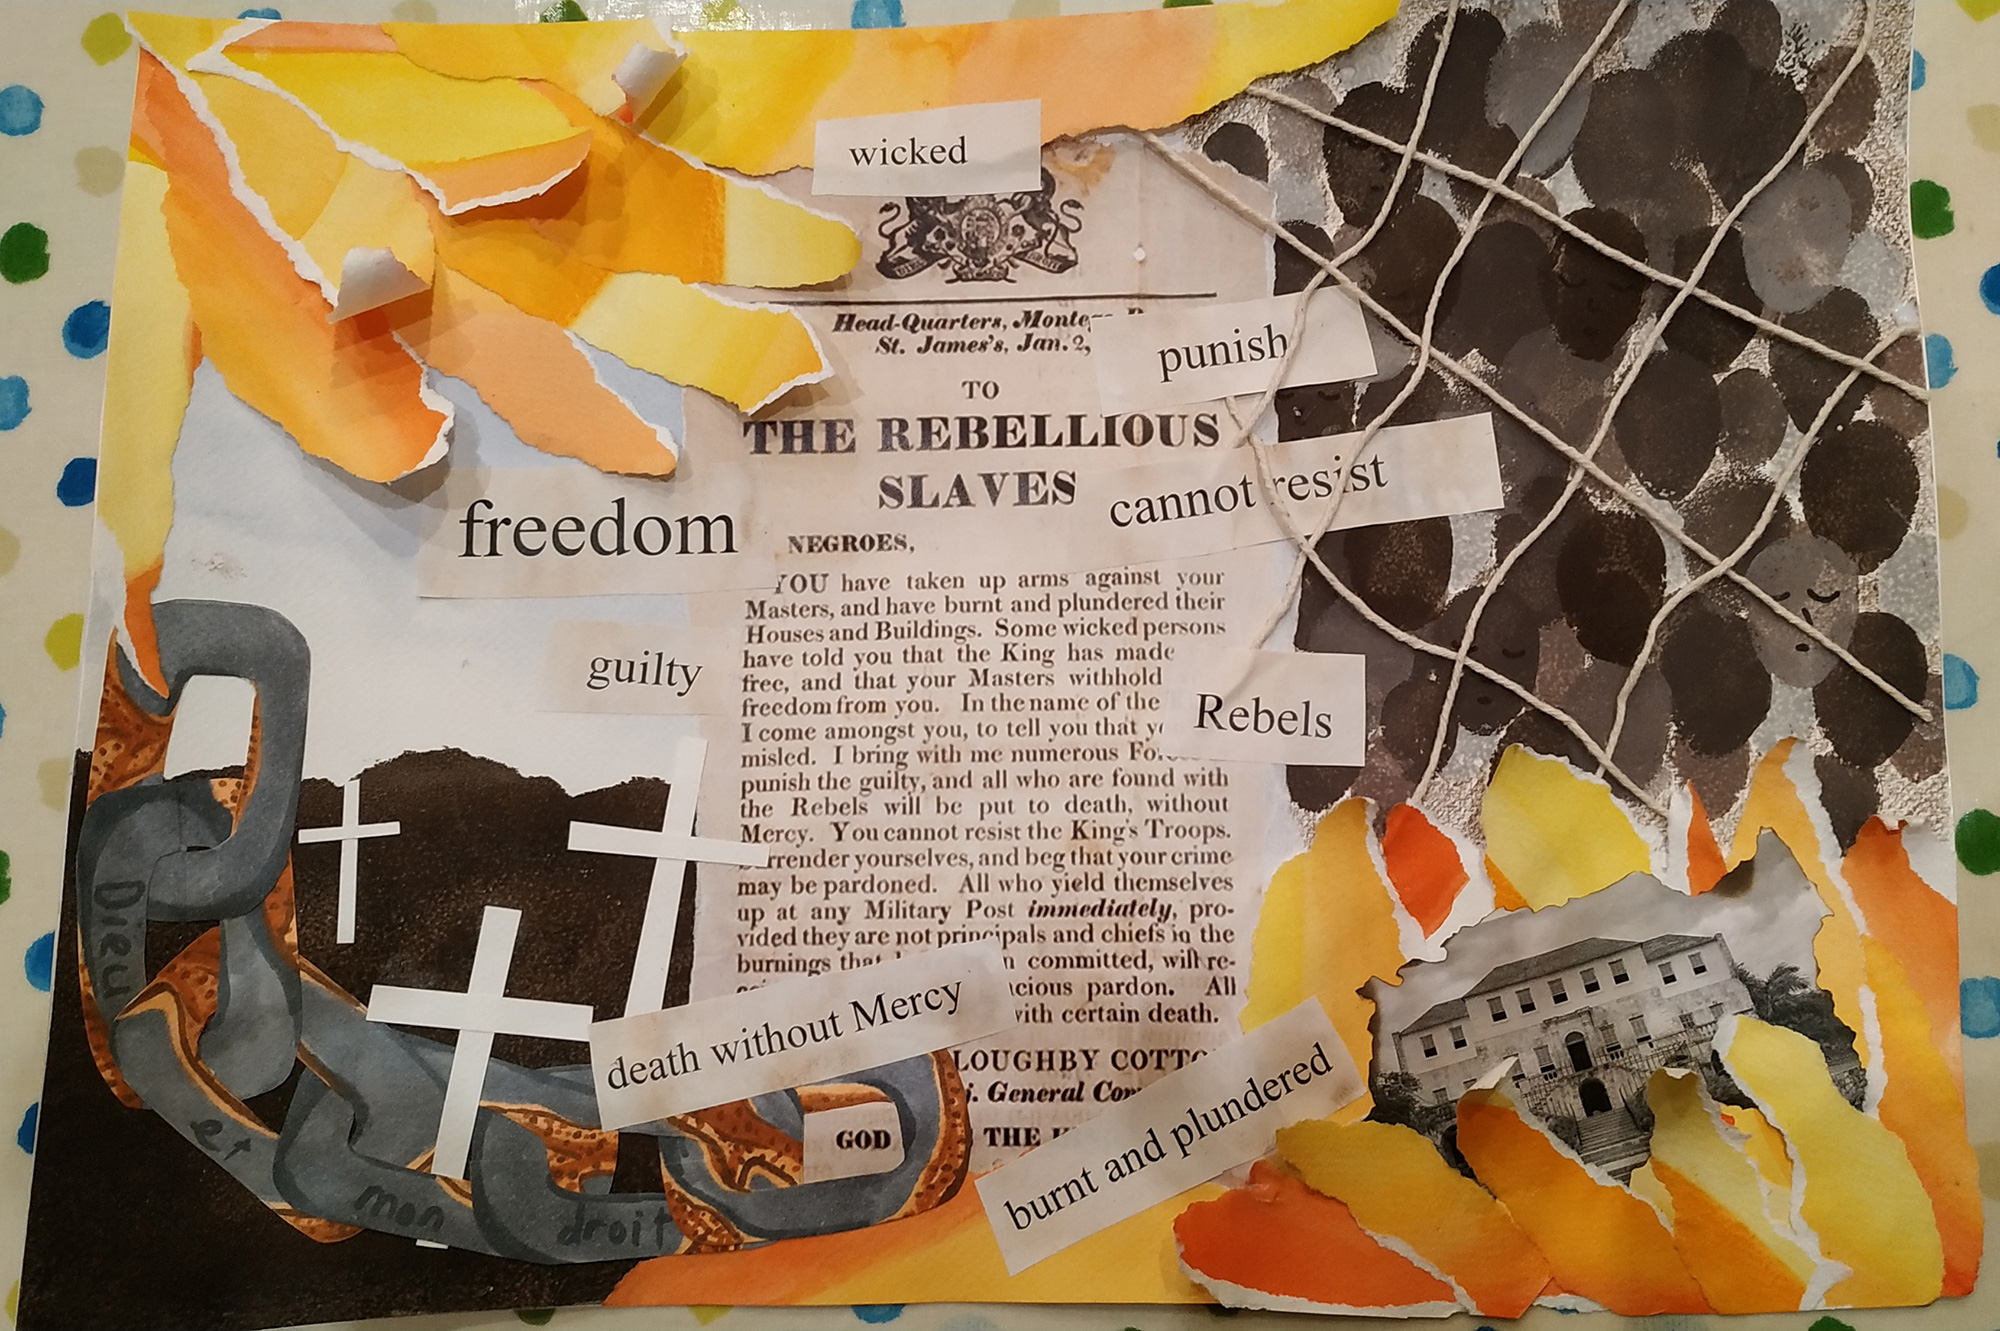 Collage artwork showcasing a historical text titled 'The Rebellious Slaves' surrounded by images of flames, chains, and people's faces behind wire.